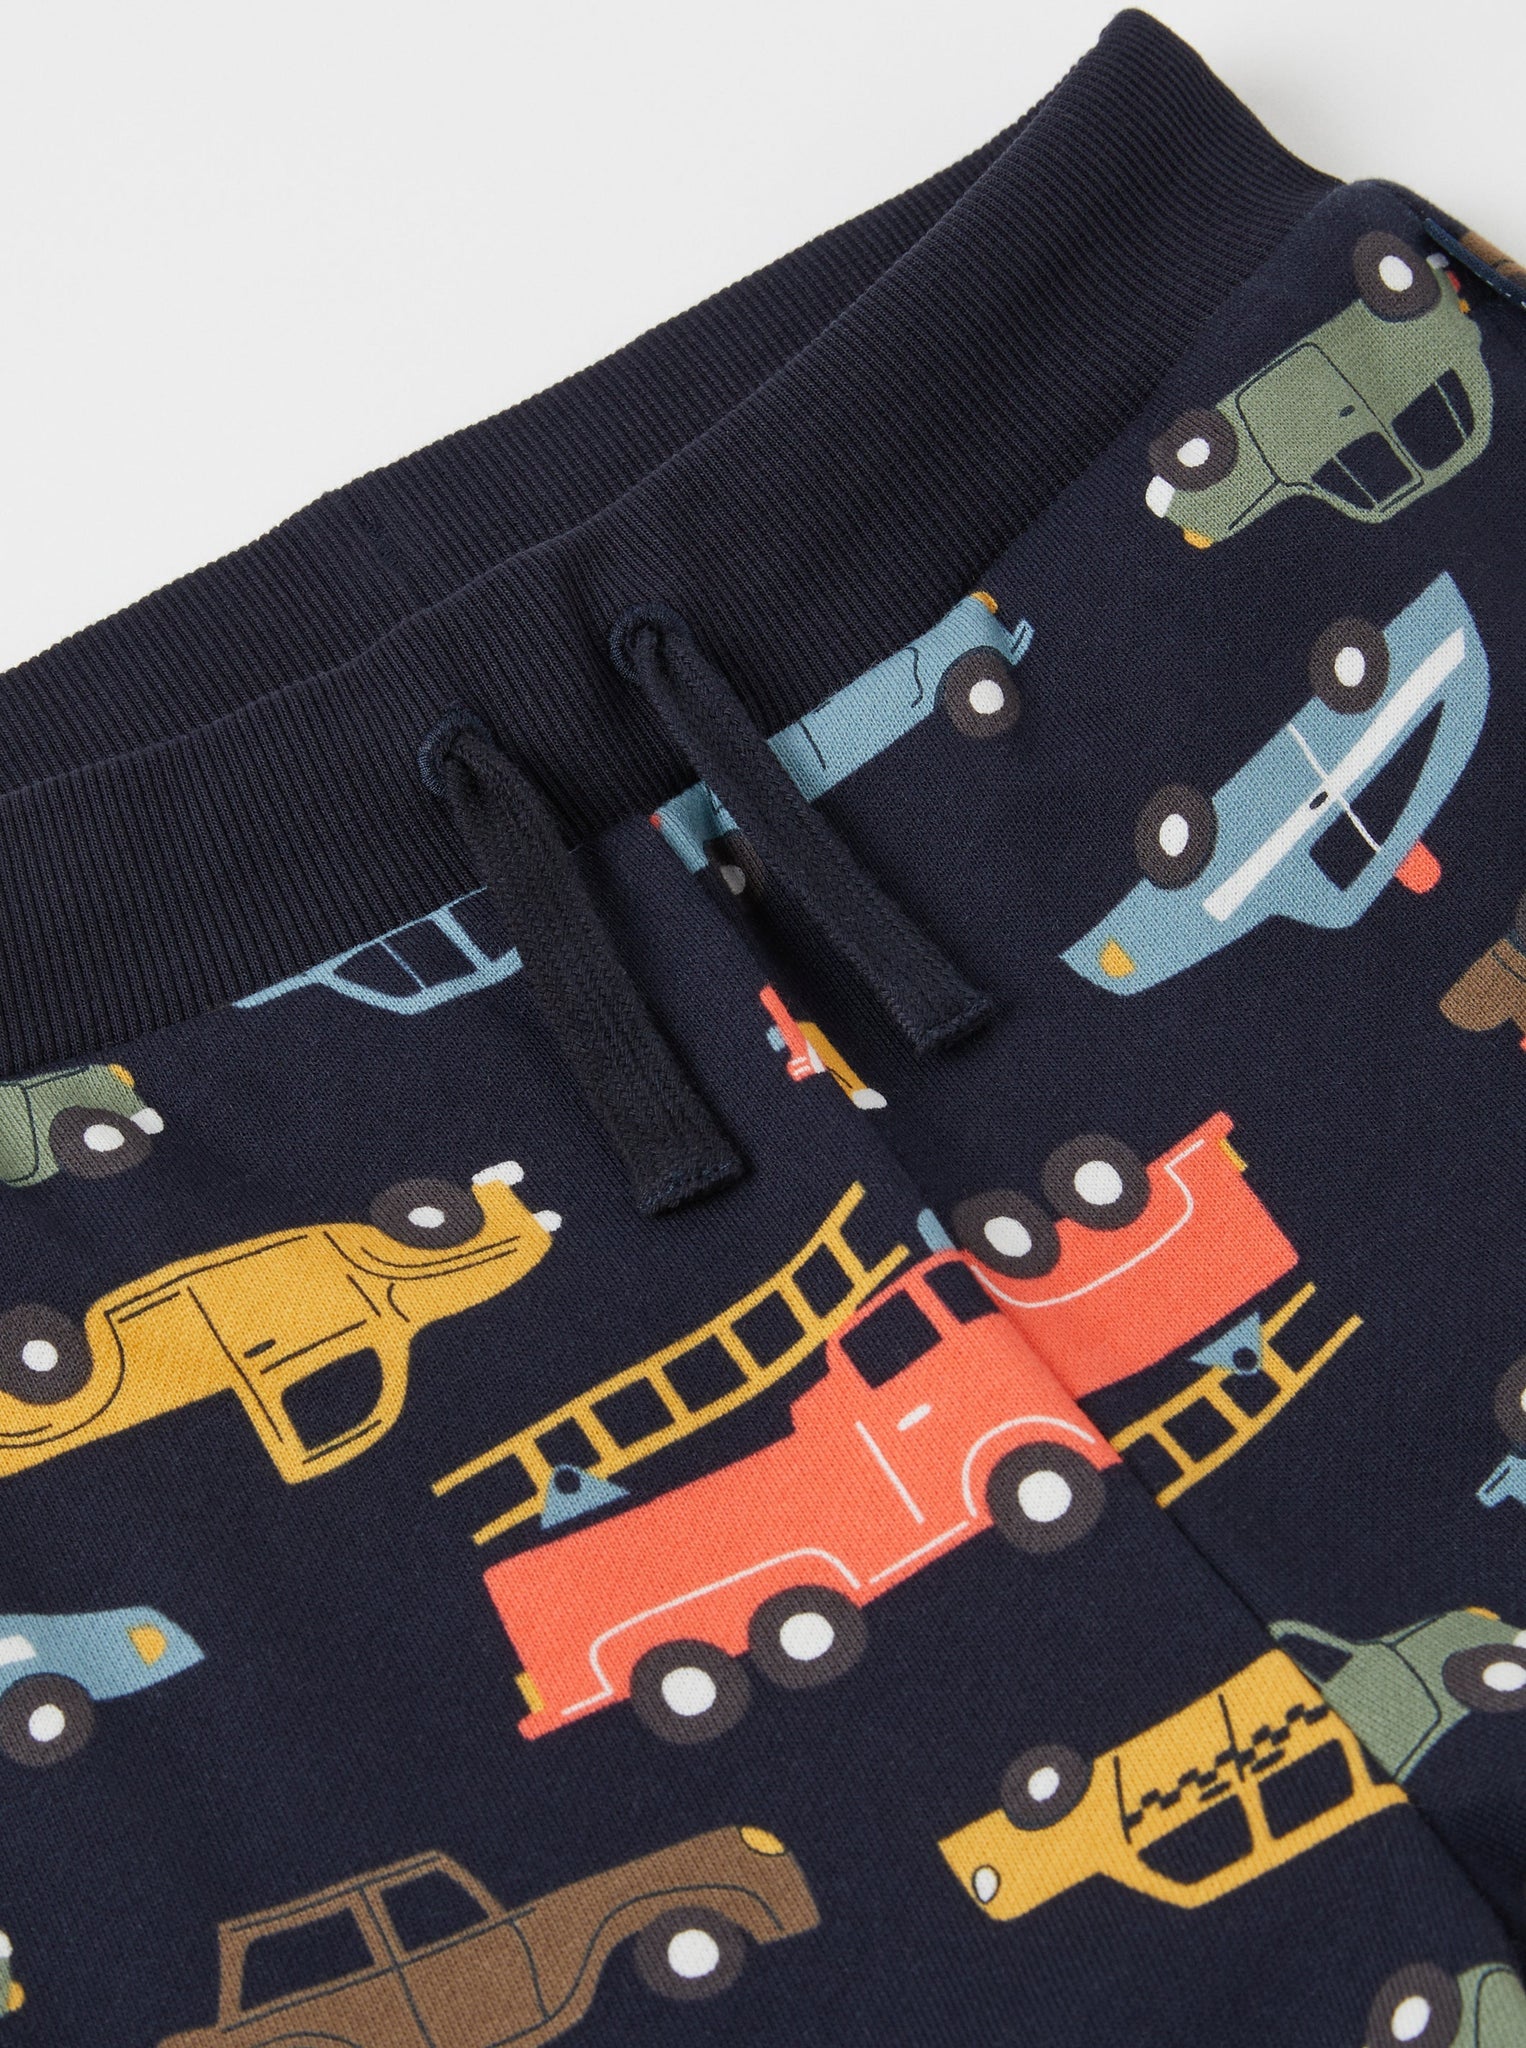 Car Print Navy Kids Joggers from the Polarn O. Pyret kidswear collection. The best ethical kids clothes